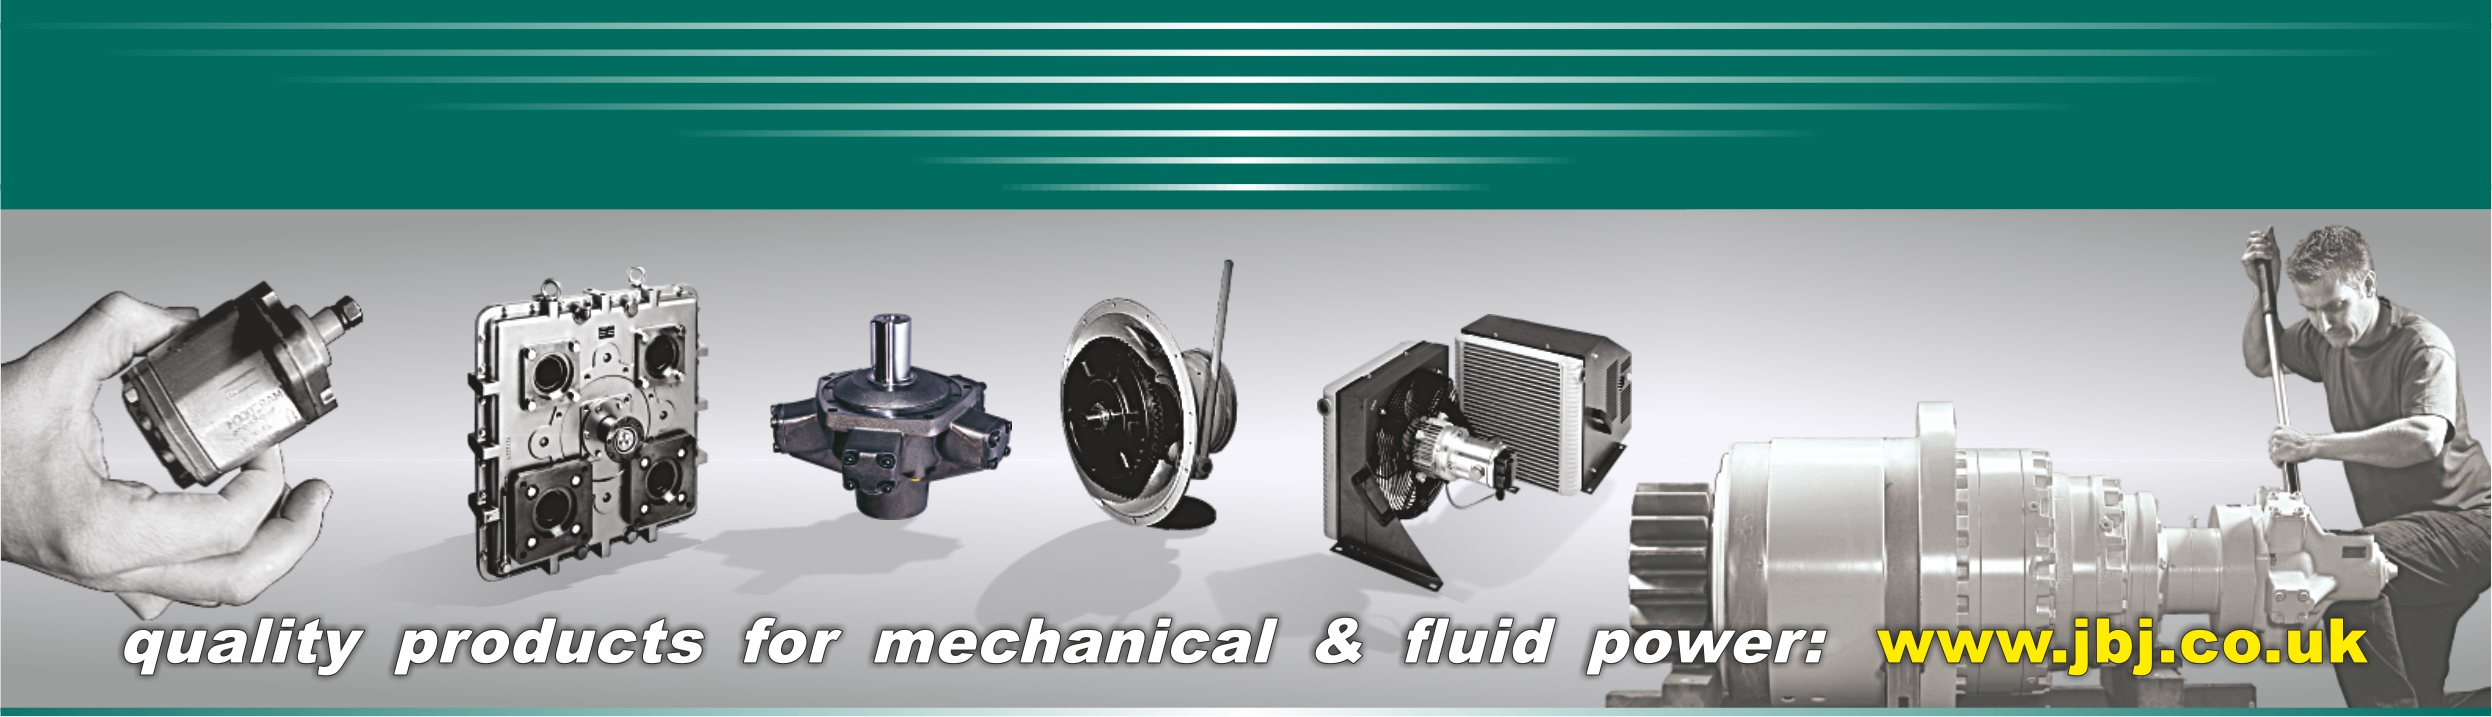 quality products for mechanical & fluid power